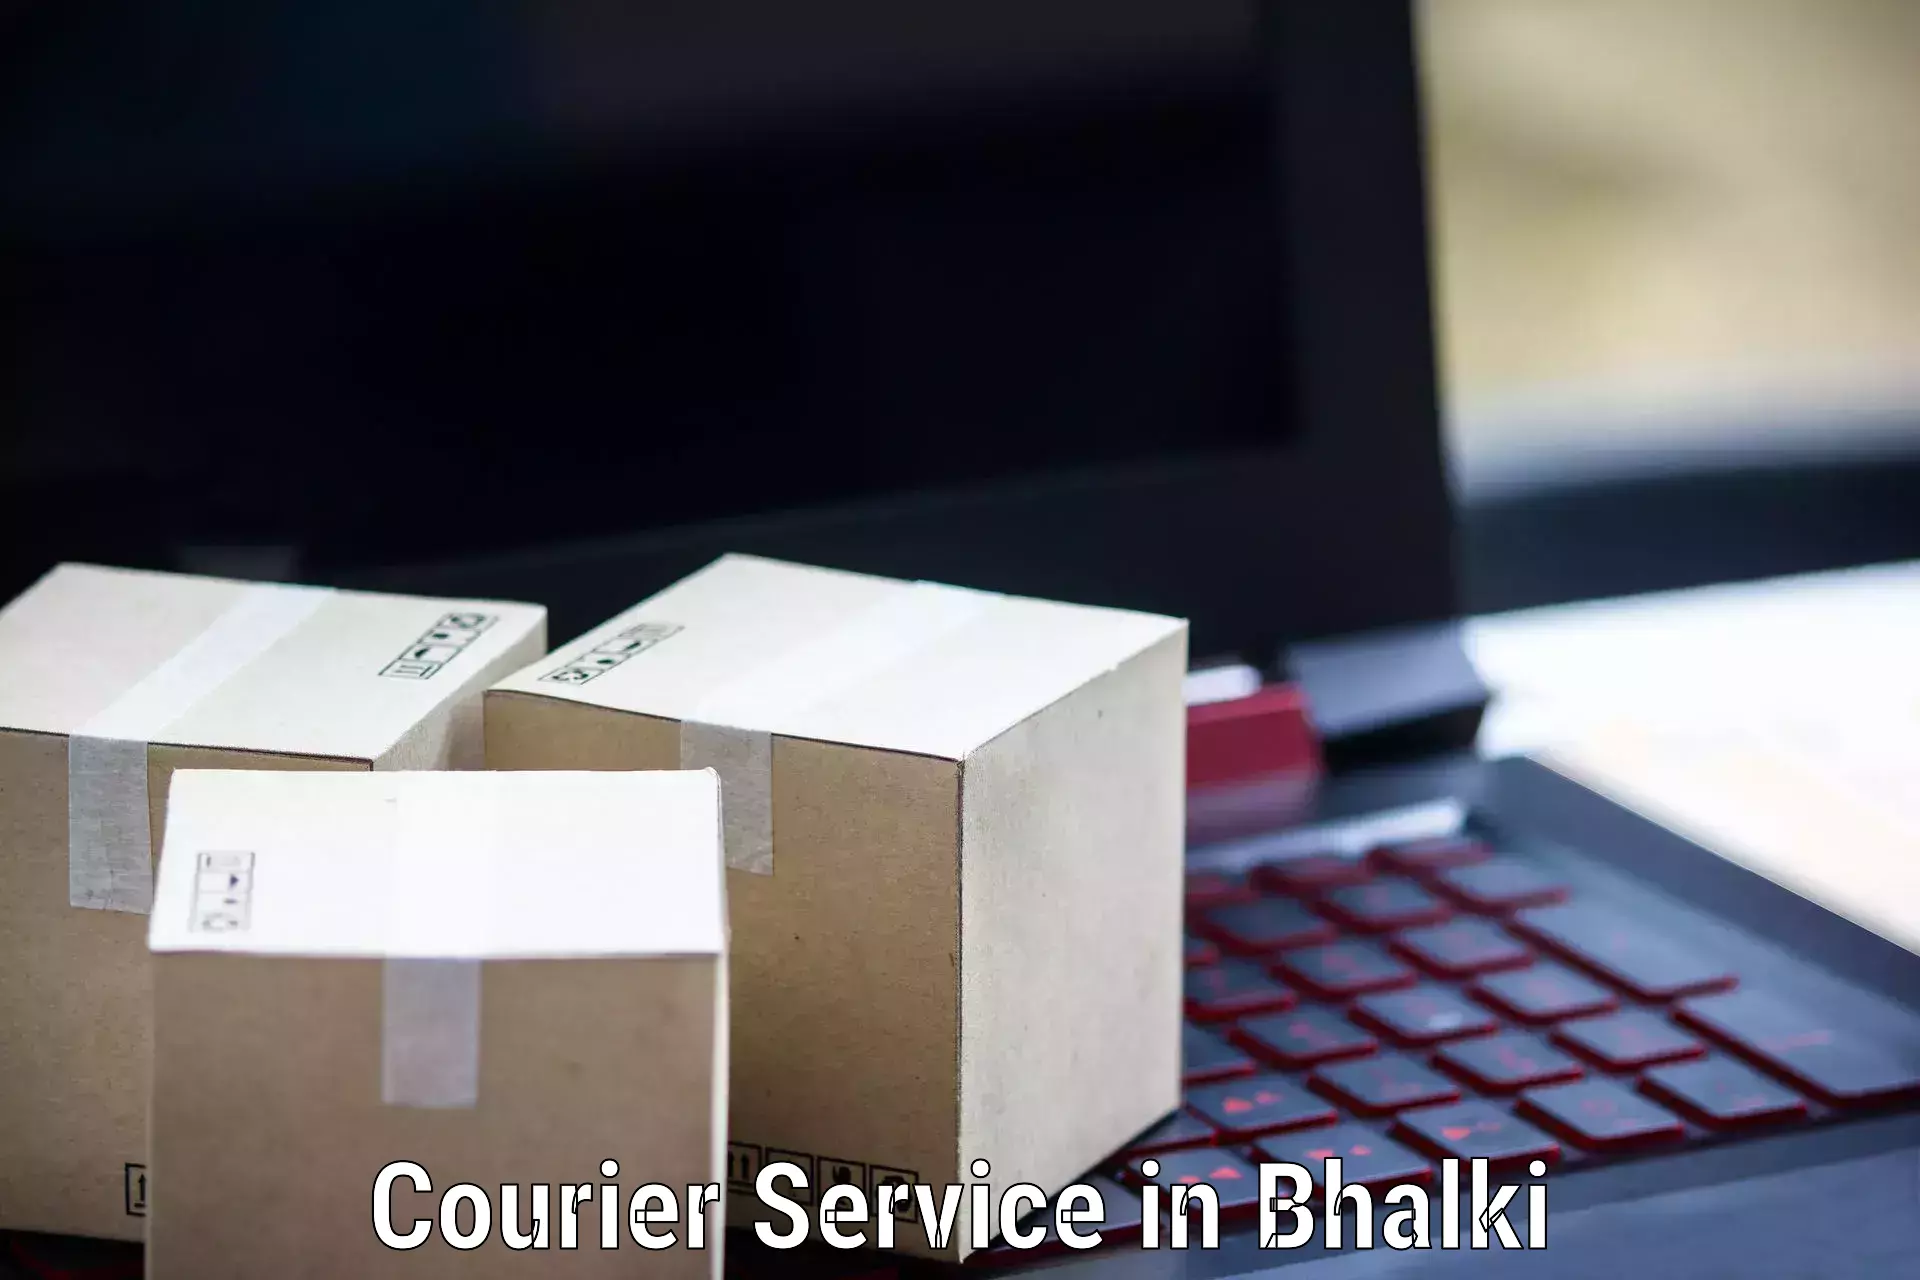 Sustainable delivery practices in Bhalki